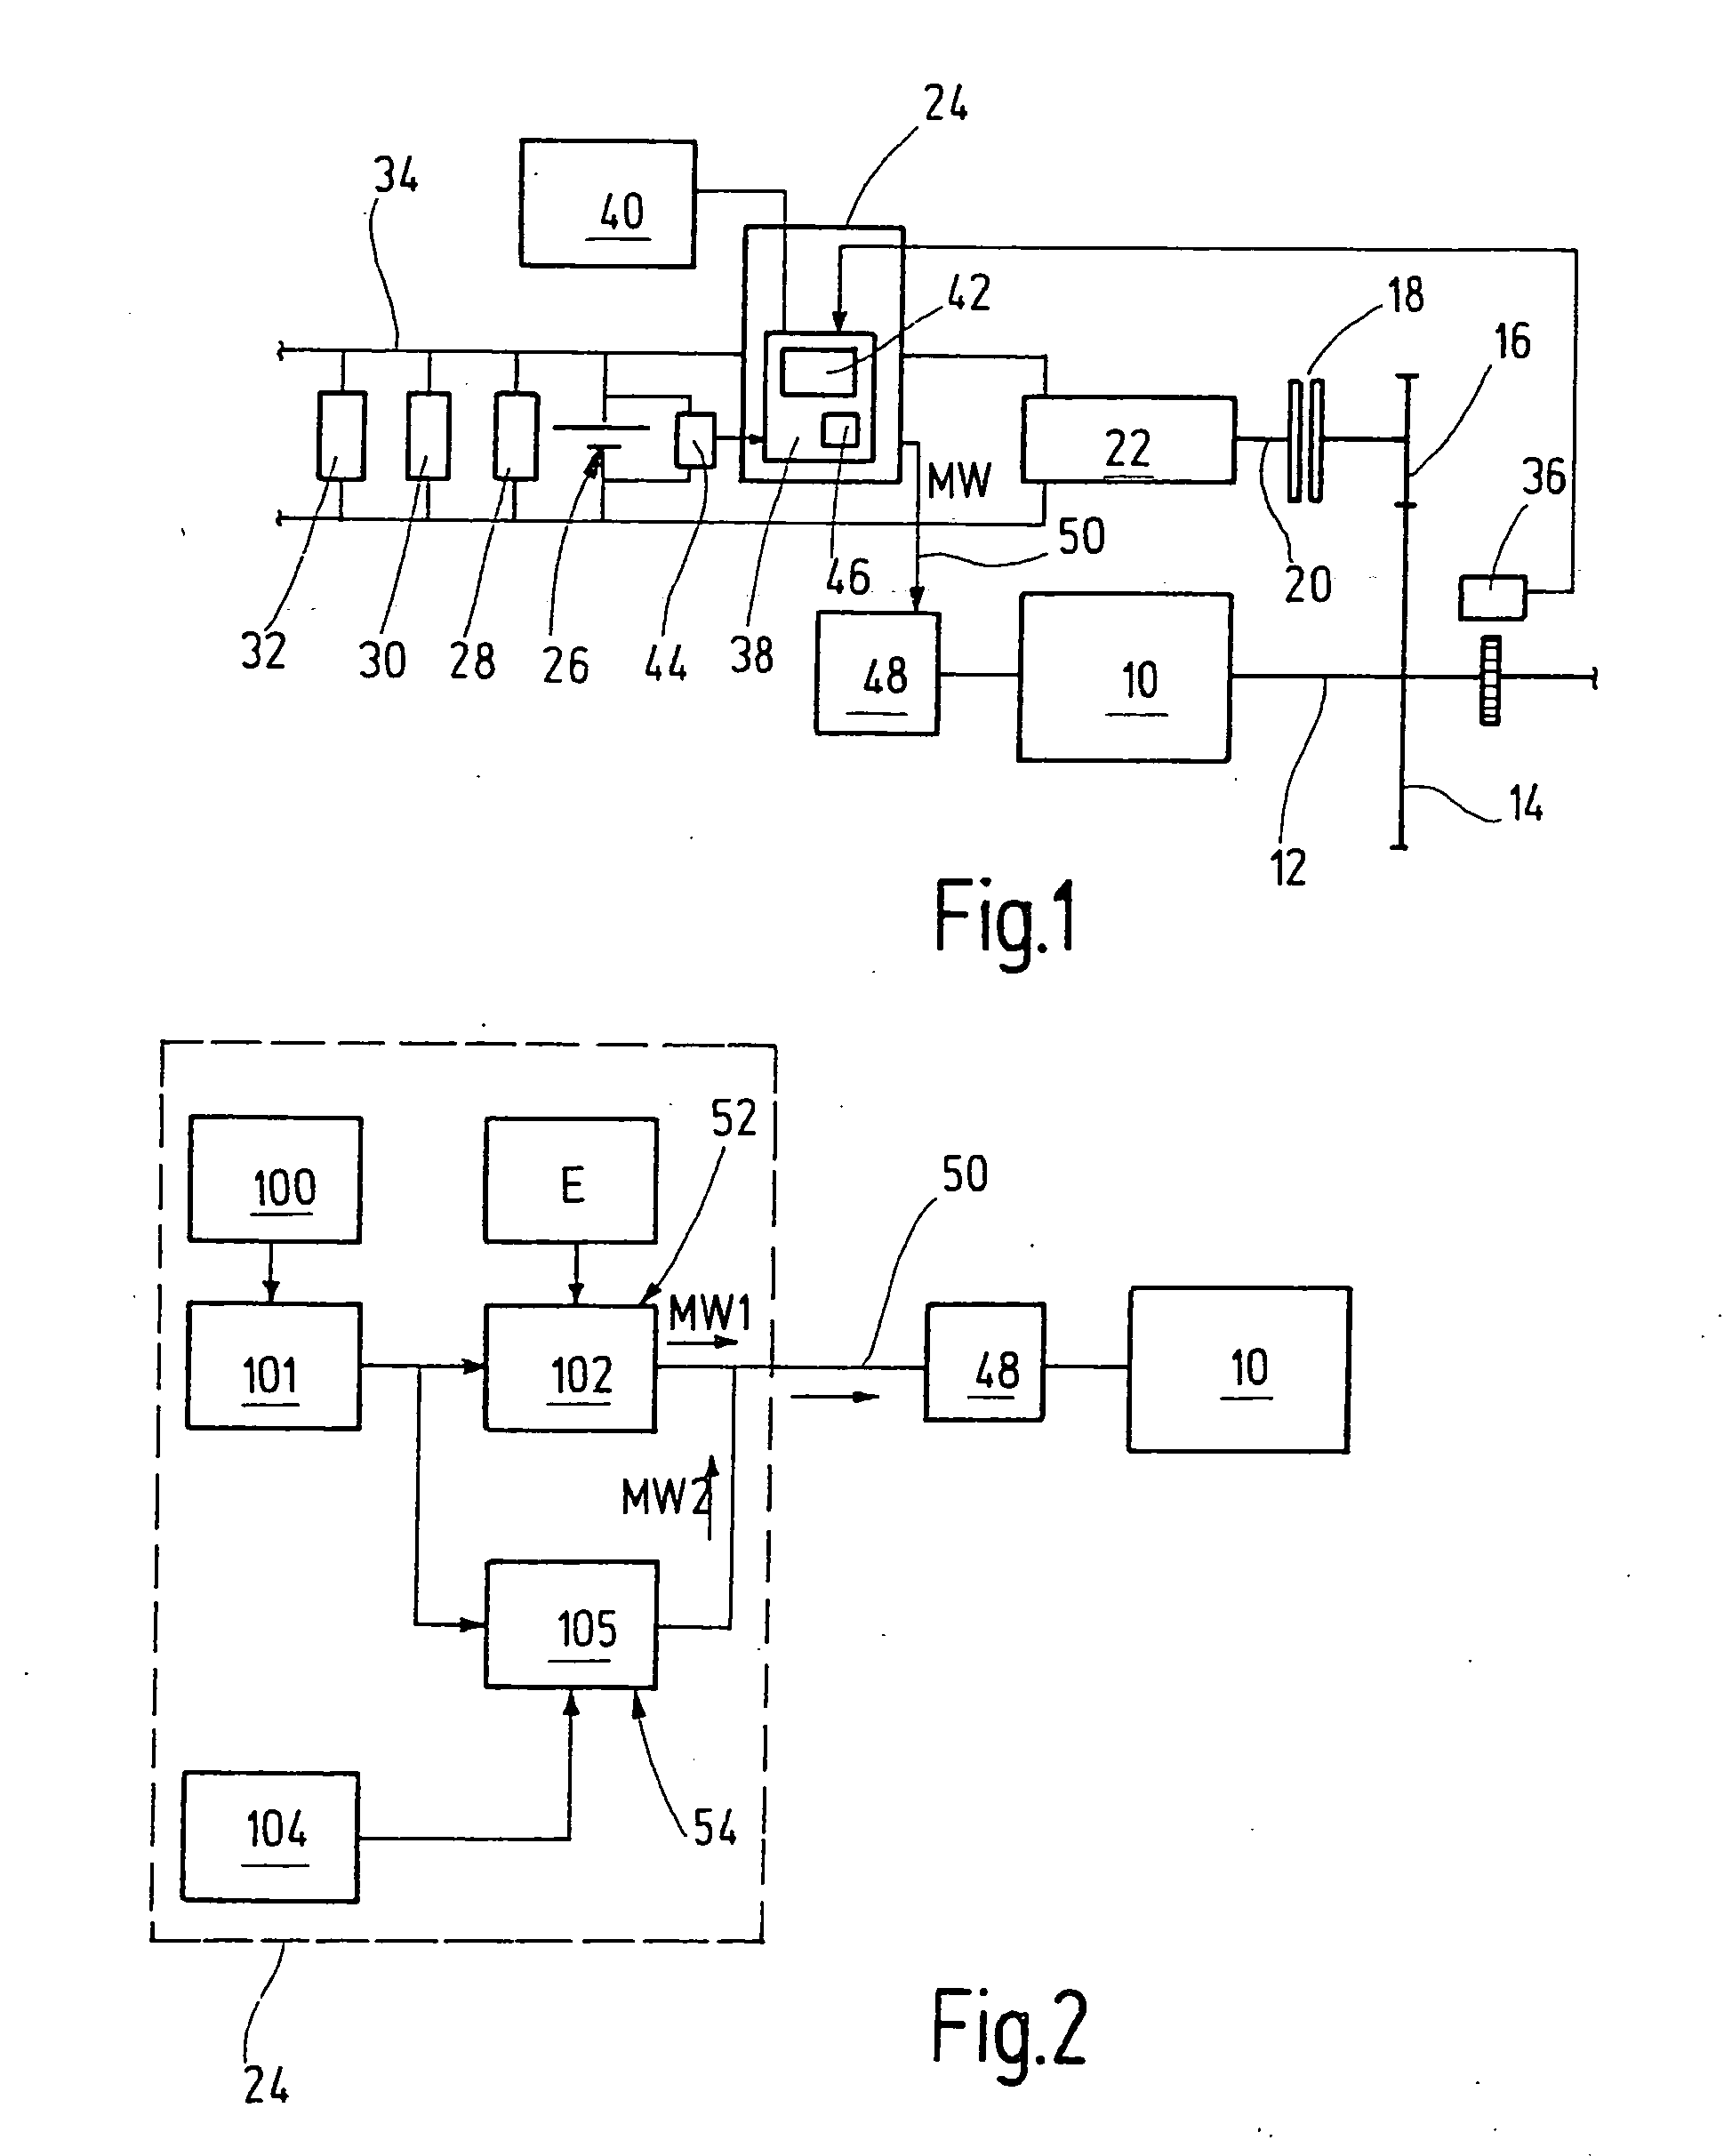 Motor vehicle comprising a hybrid drive and method for controlling the idle speed of a hybrid drive of a motor vehicle